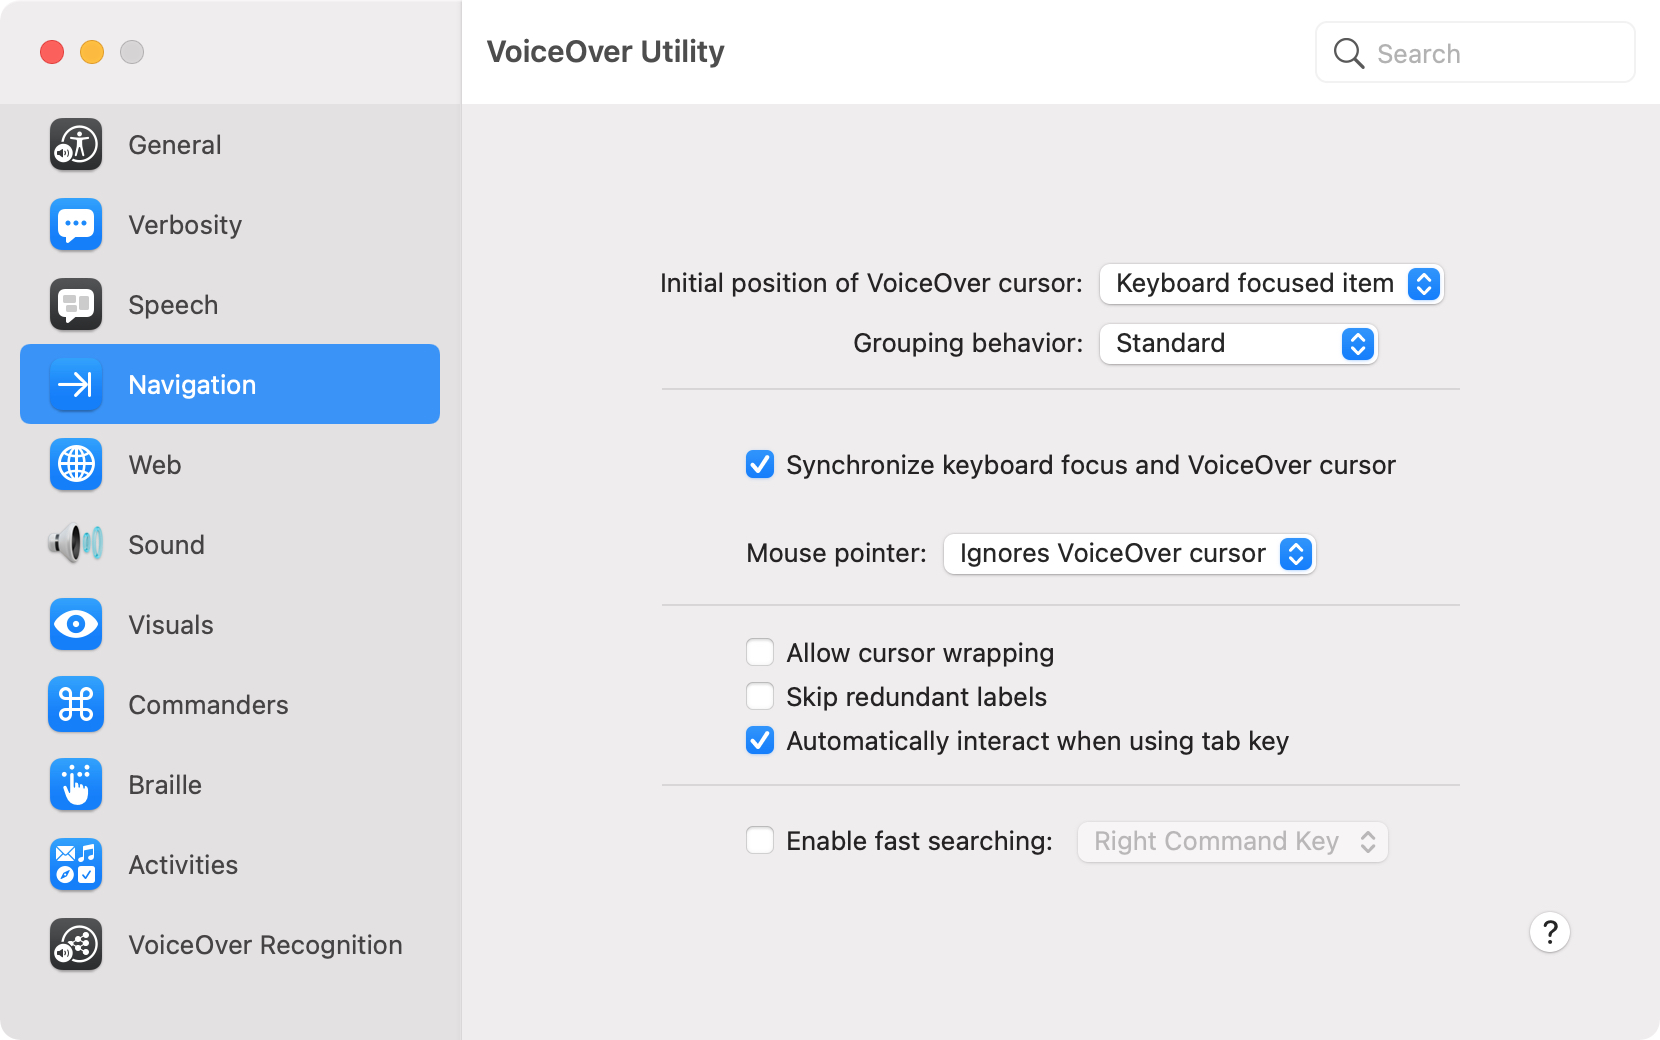 VoiceOver Utility Navigation